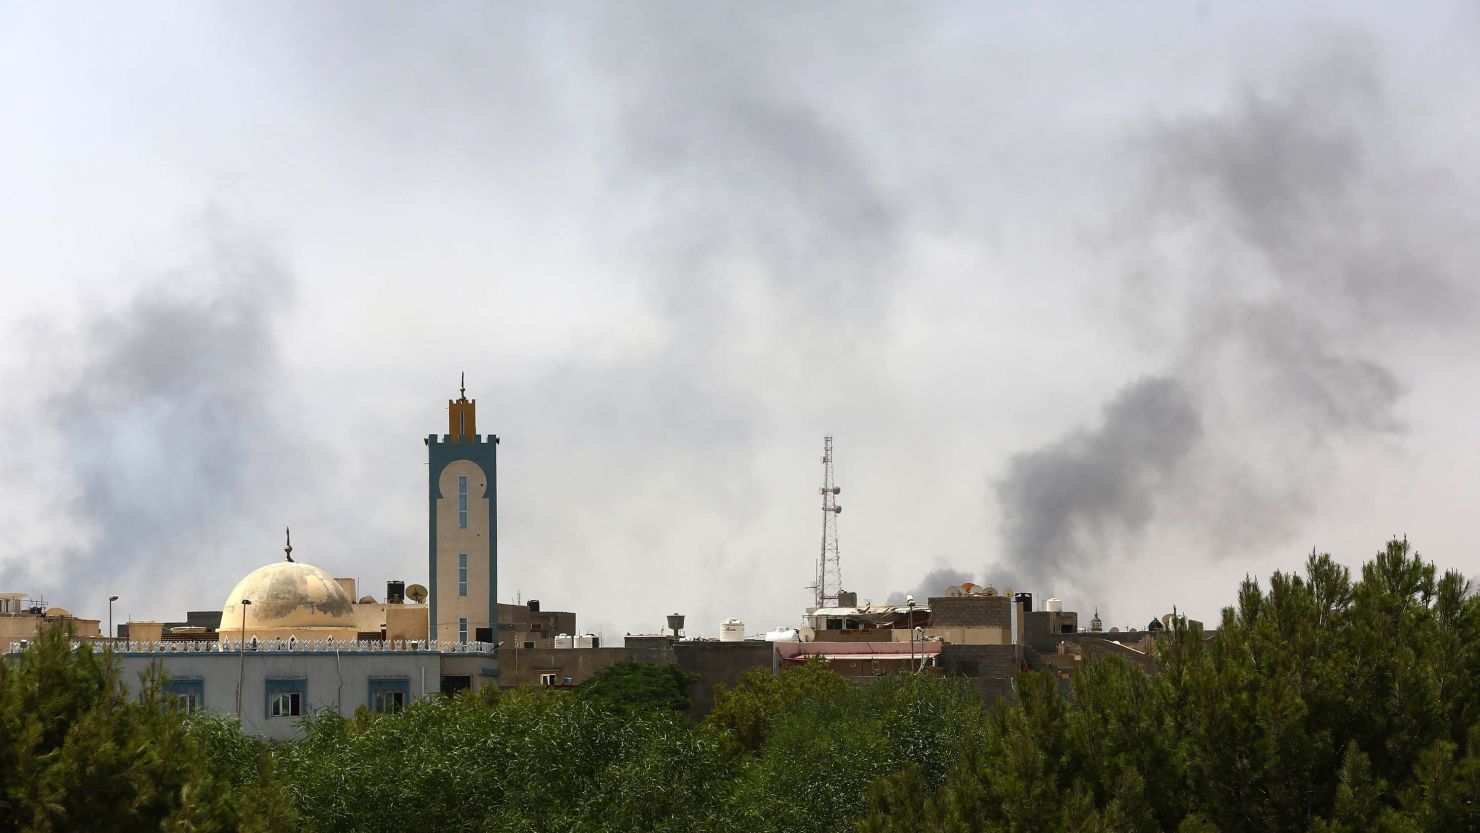 Black smoke is seen rising in the area of Tripoli International Airport where clashes have raged between Libyan militias.